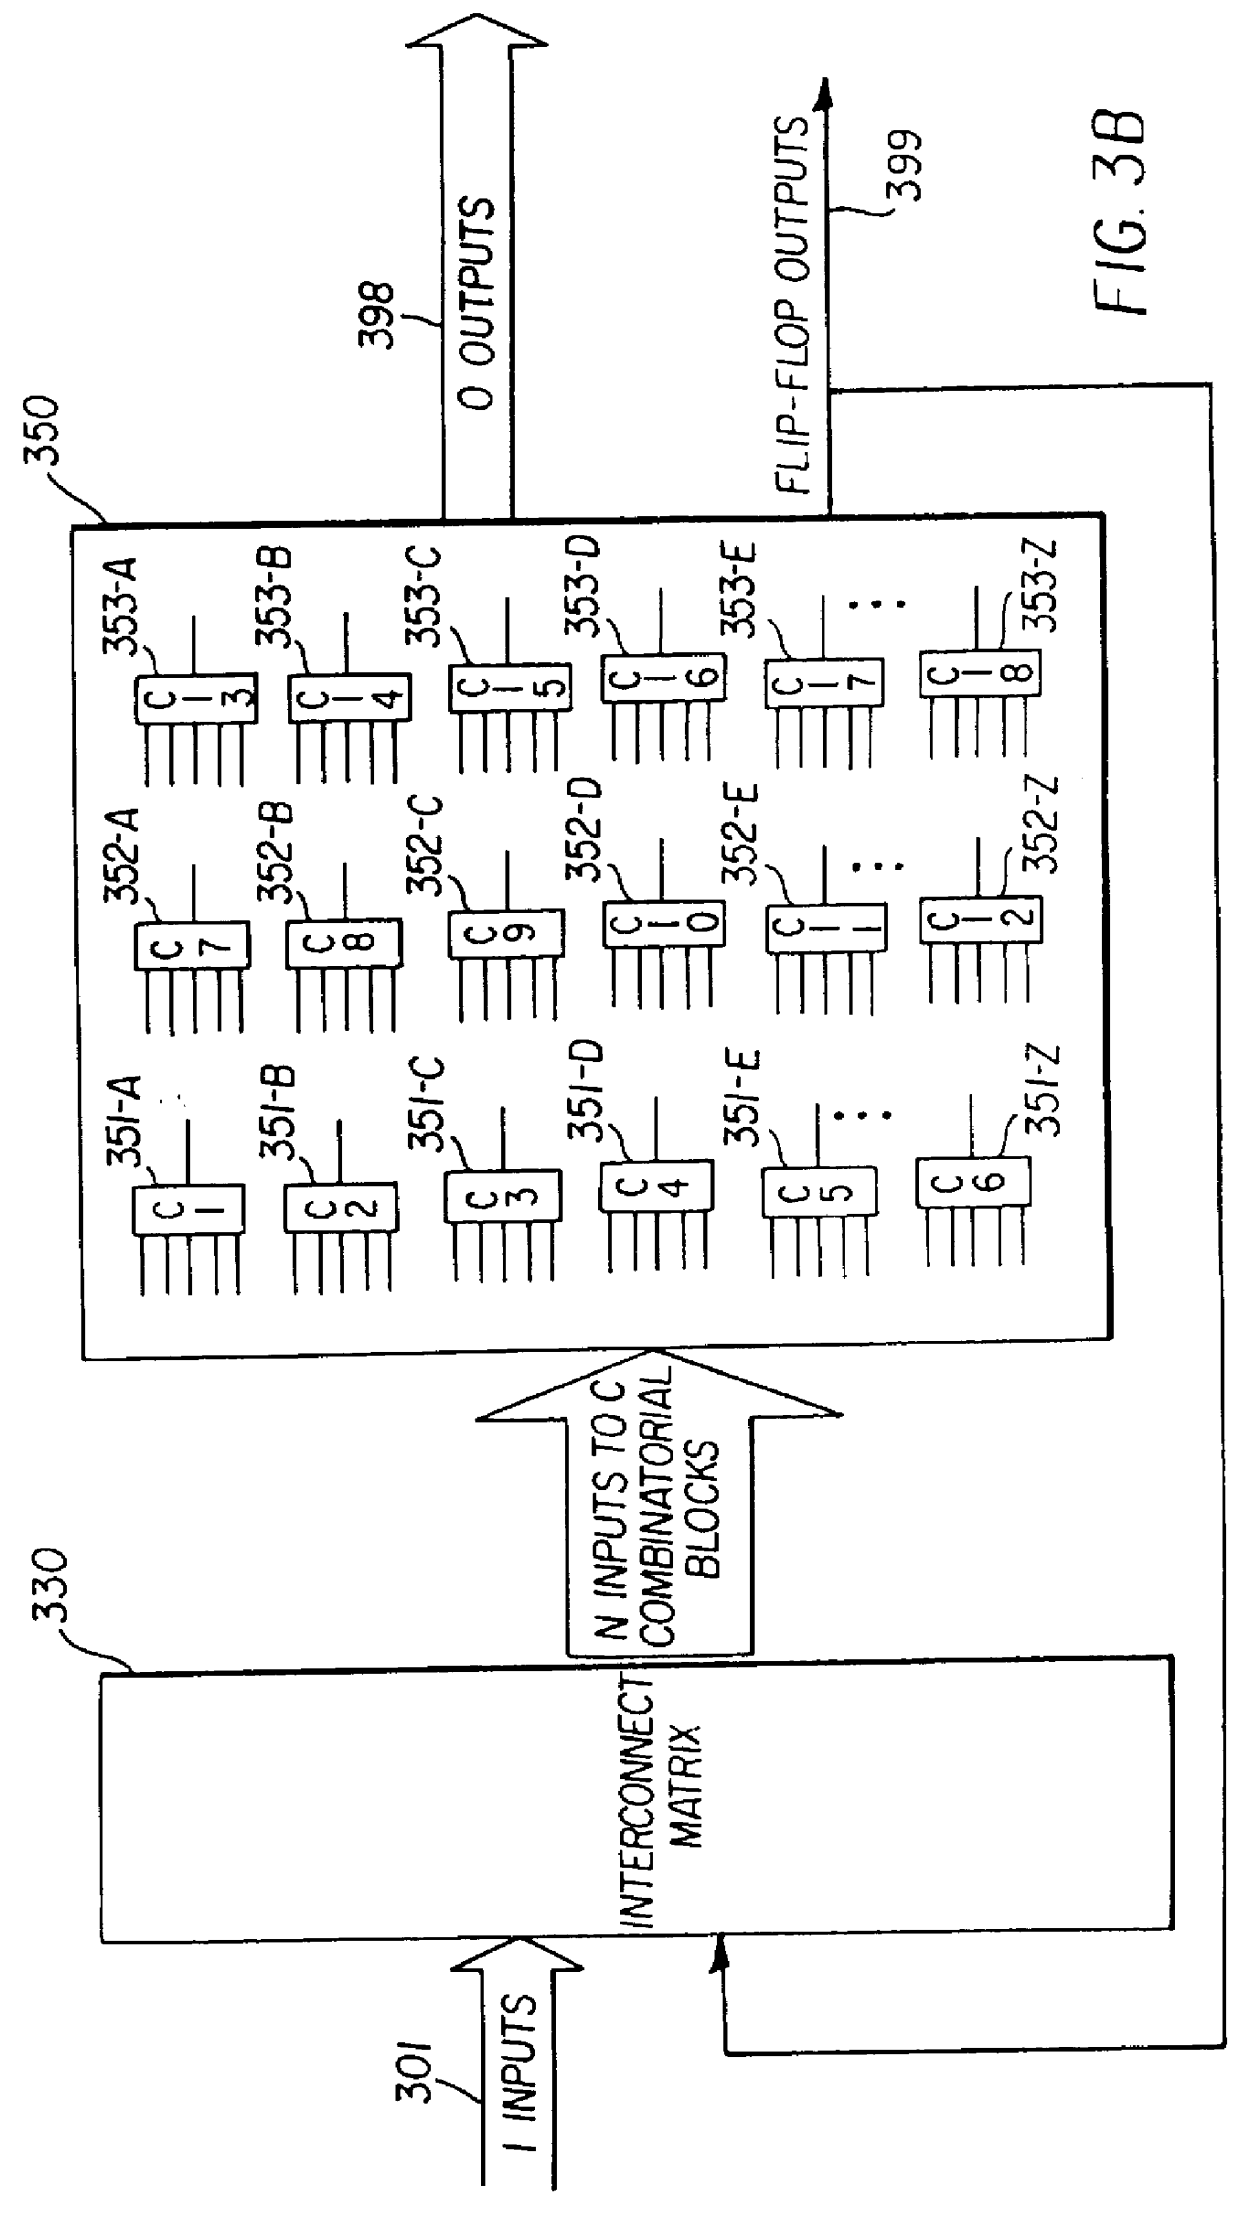 Functional verification of integrated circuit designs